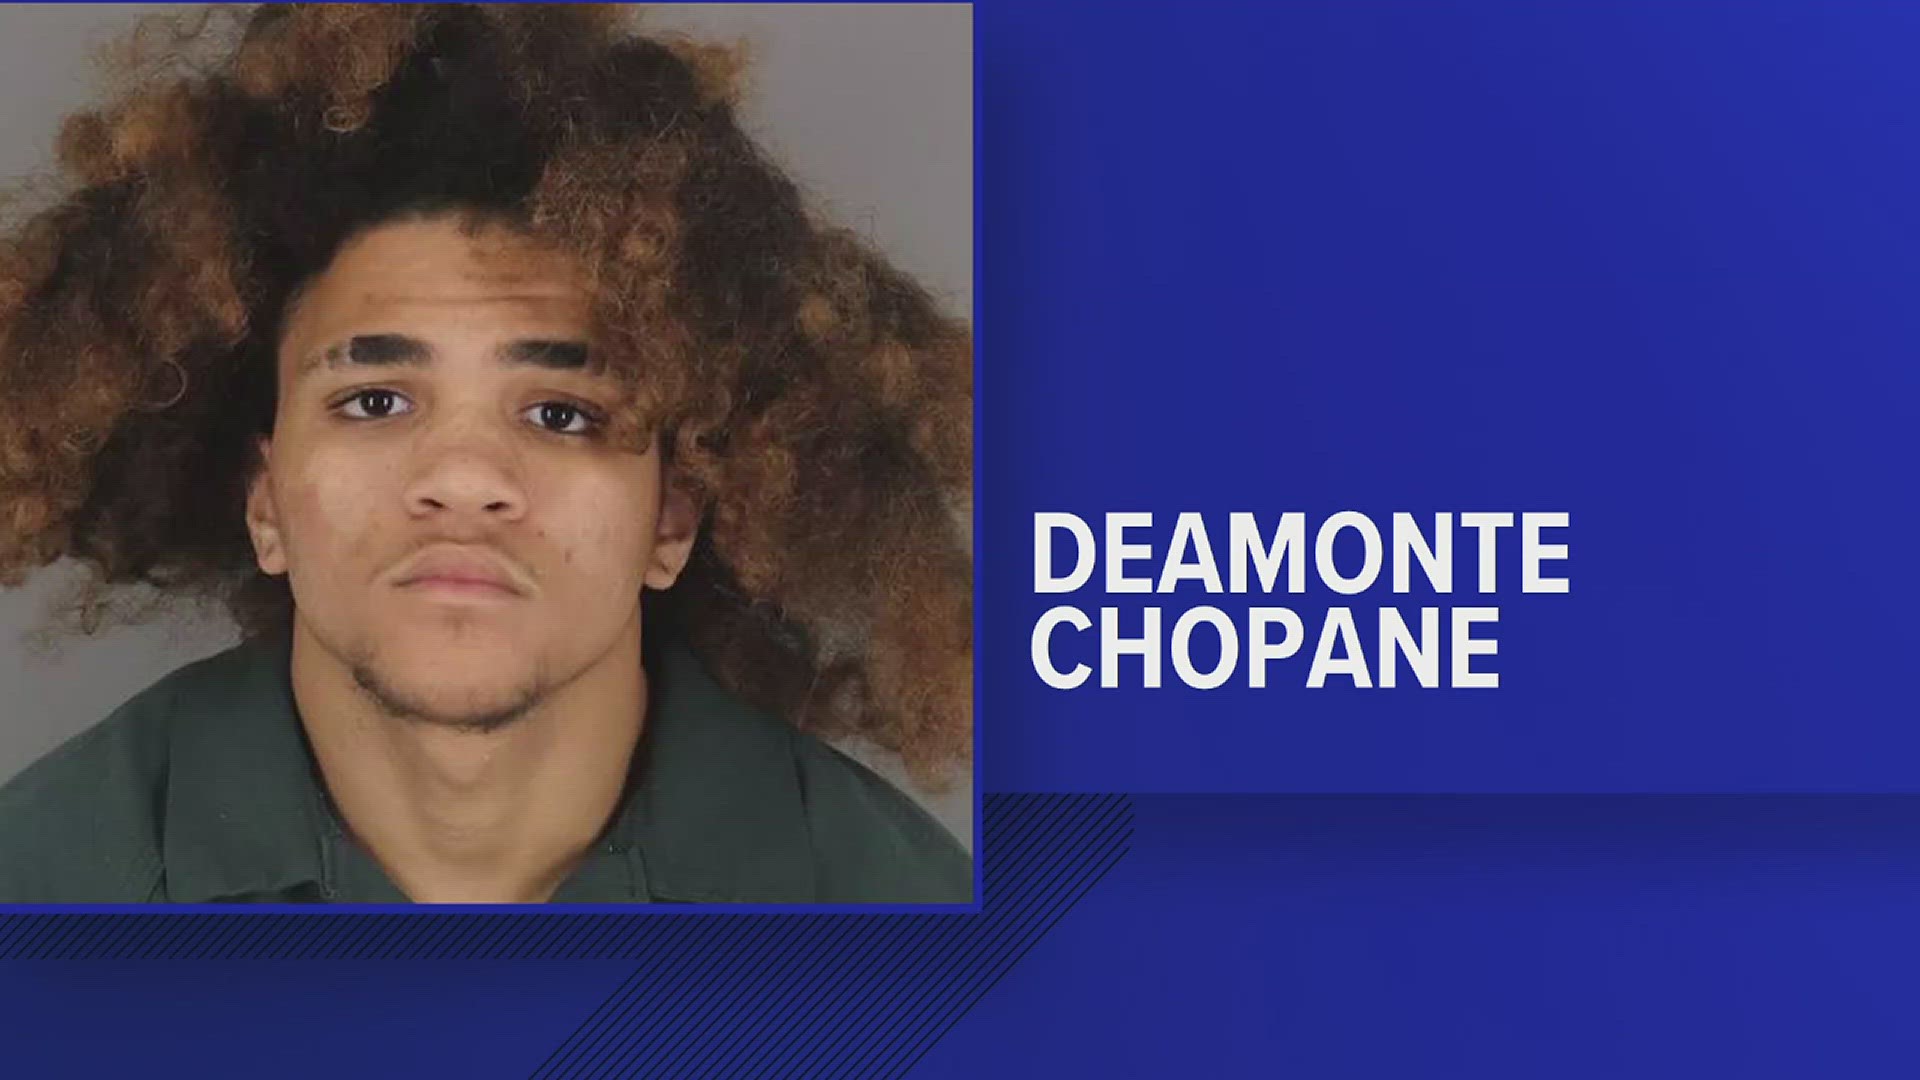 The driver, 18-year-old Beaumont resident, Deamonte Chopane, and a minor passenger both fled from the vehicle on foot. They were eventually caught and arrested.